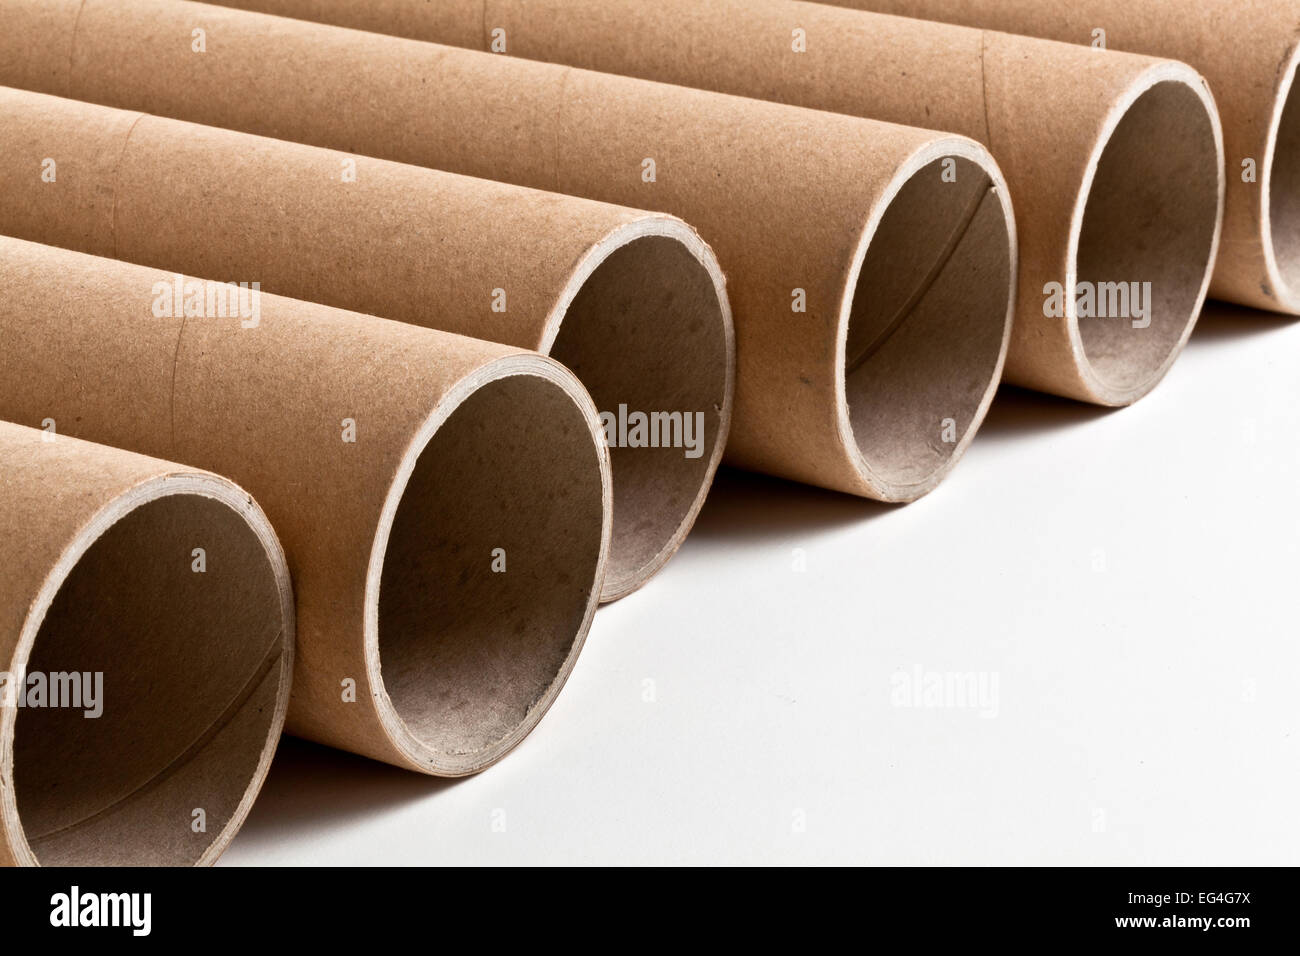 detail of classic cardboard pipe Stock Photo